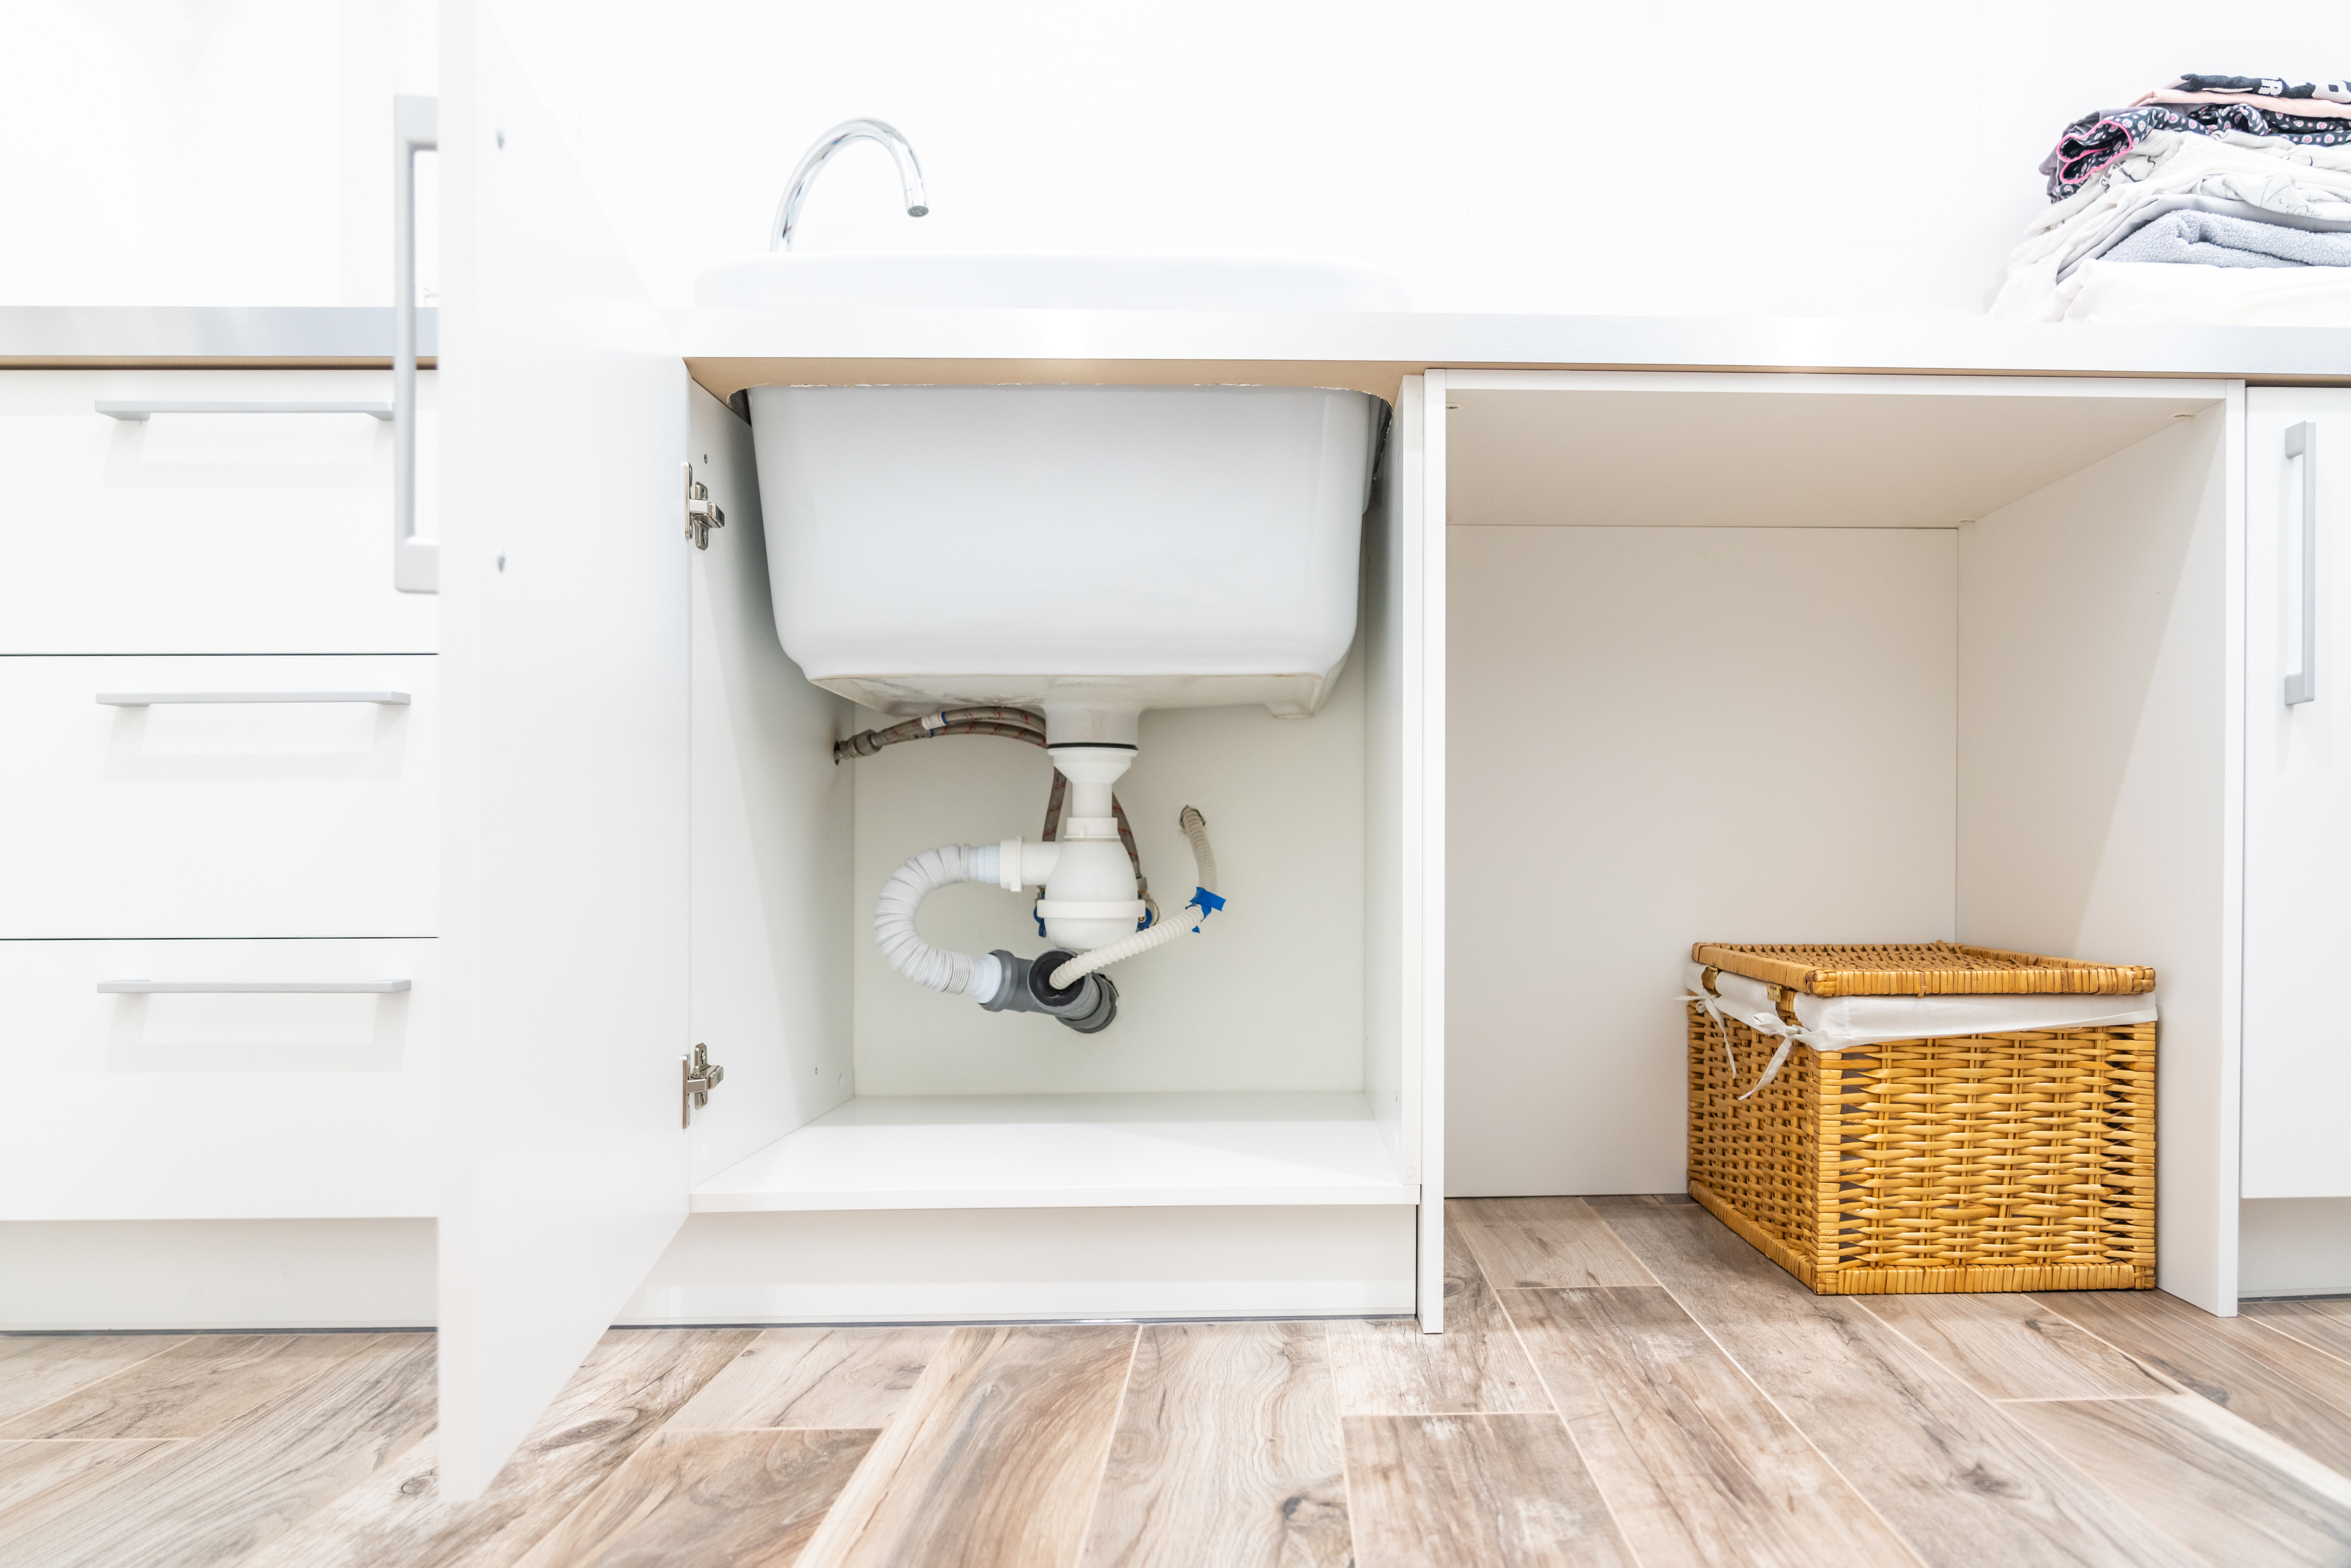 How to Organize Under Your Bathroom Sink